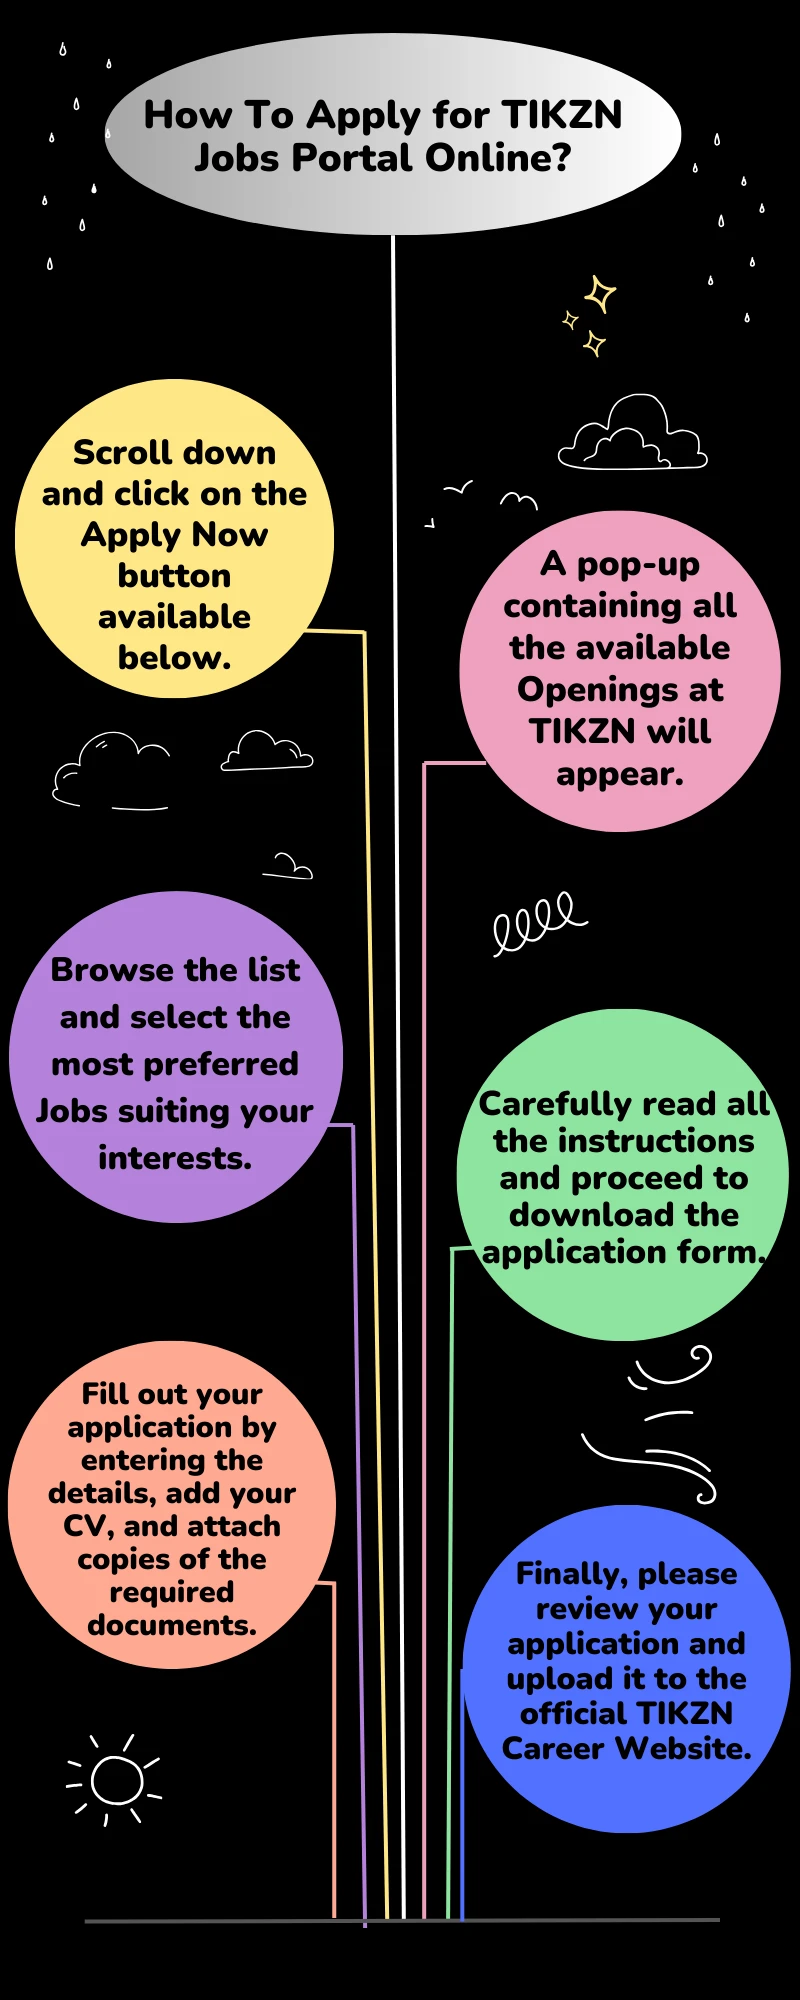 How To Apply for TIKZN Jobs Portal Online?